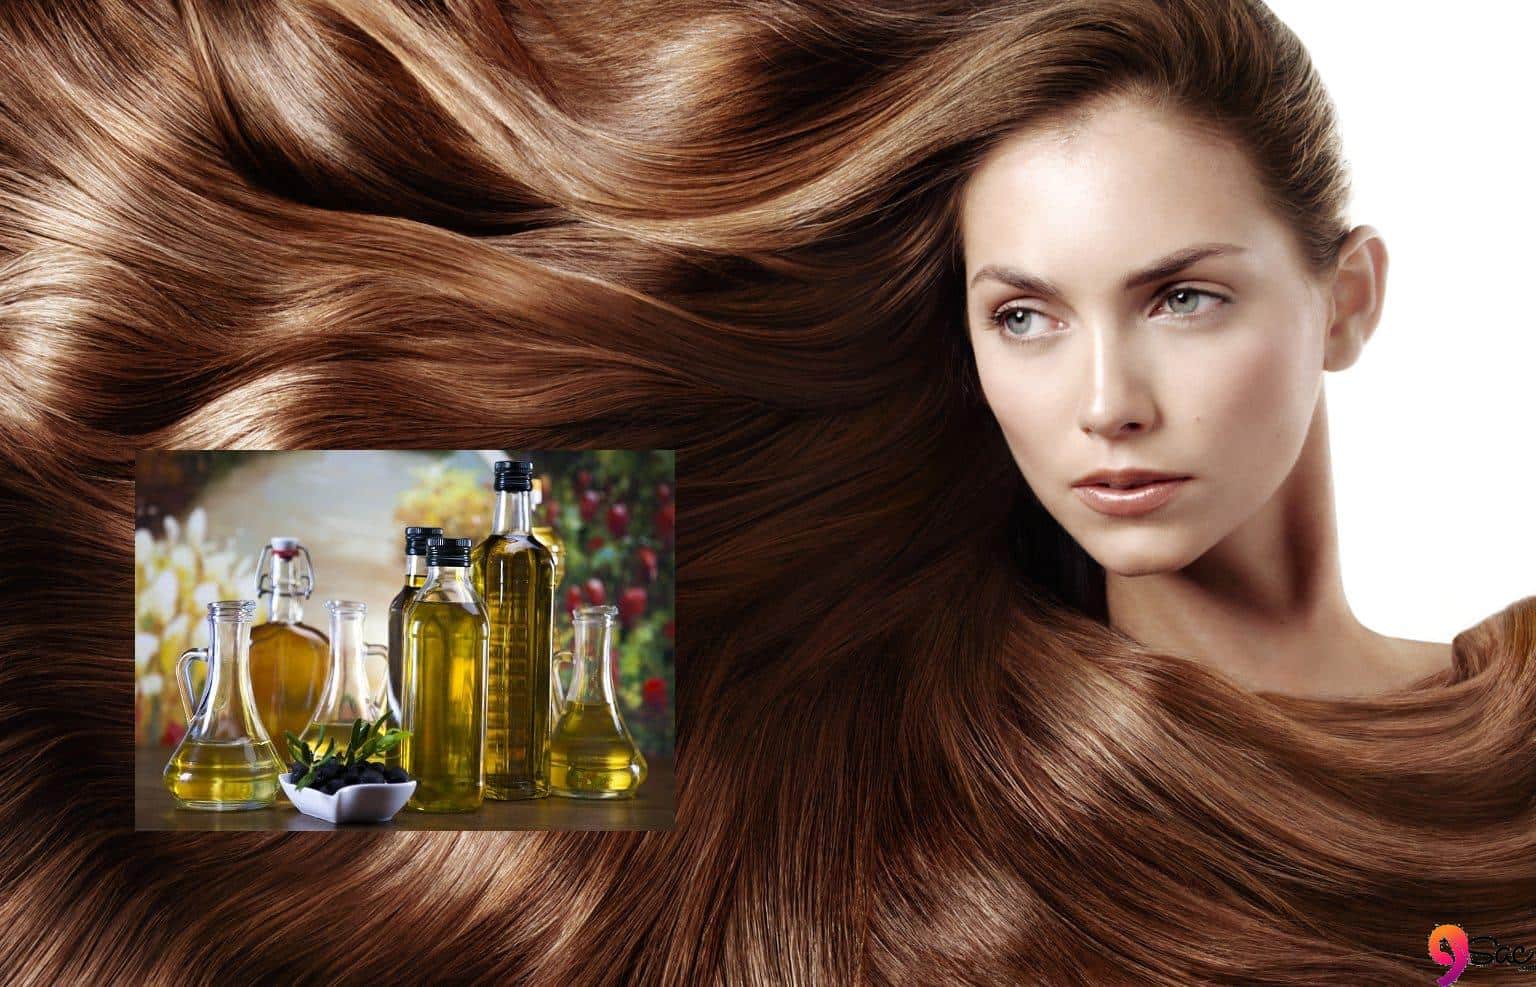 Hair straightening with hot oil